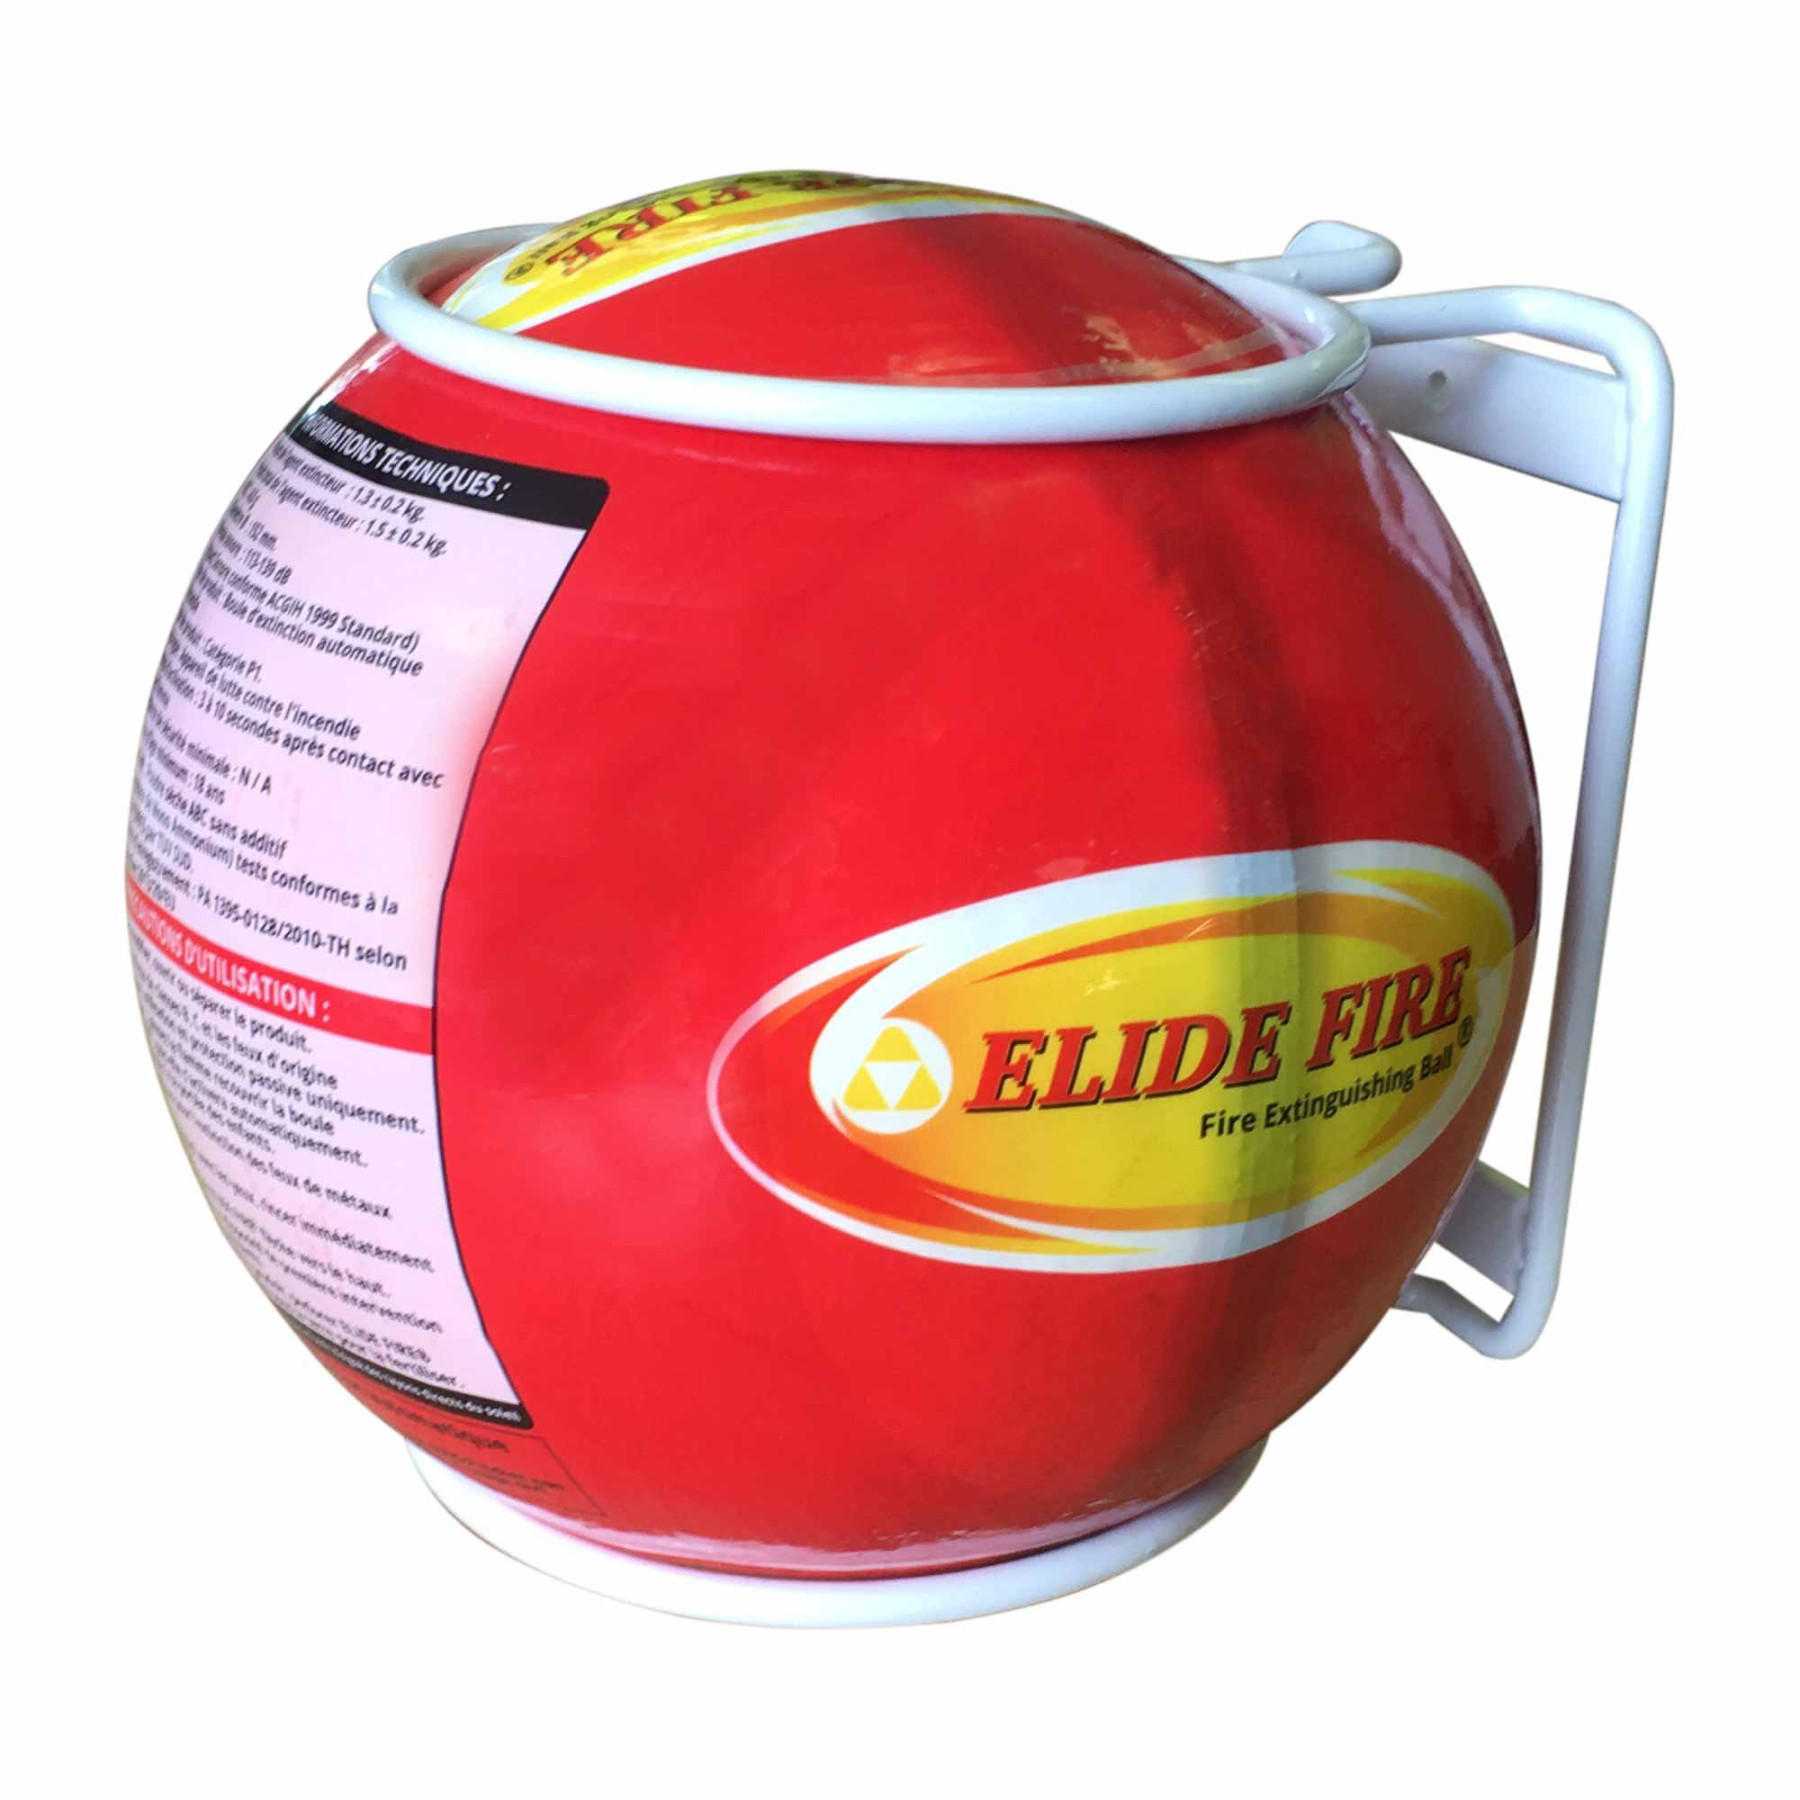 The Elide Fire Extinguishing Ball!